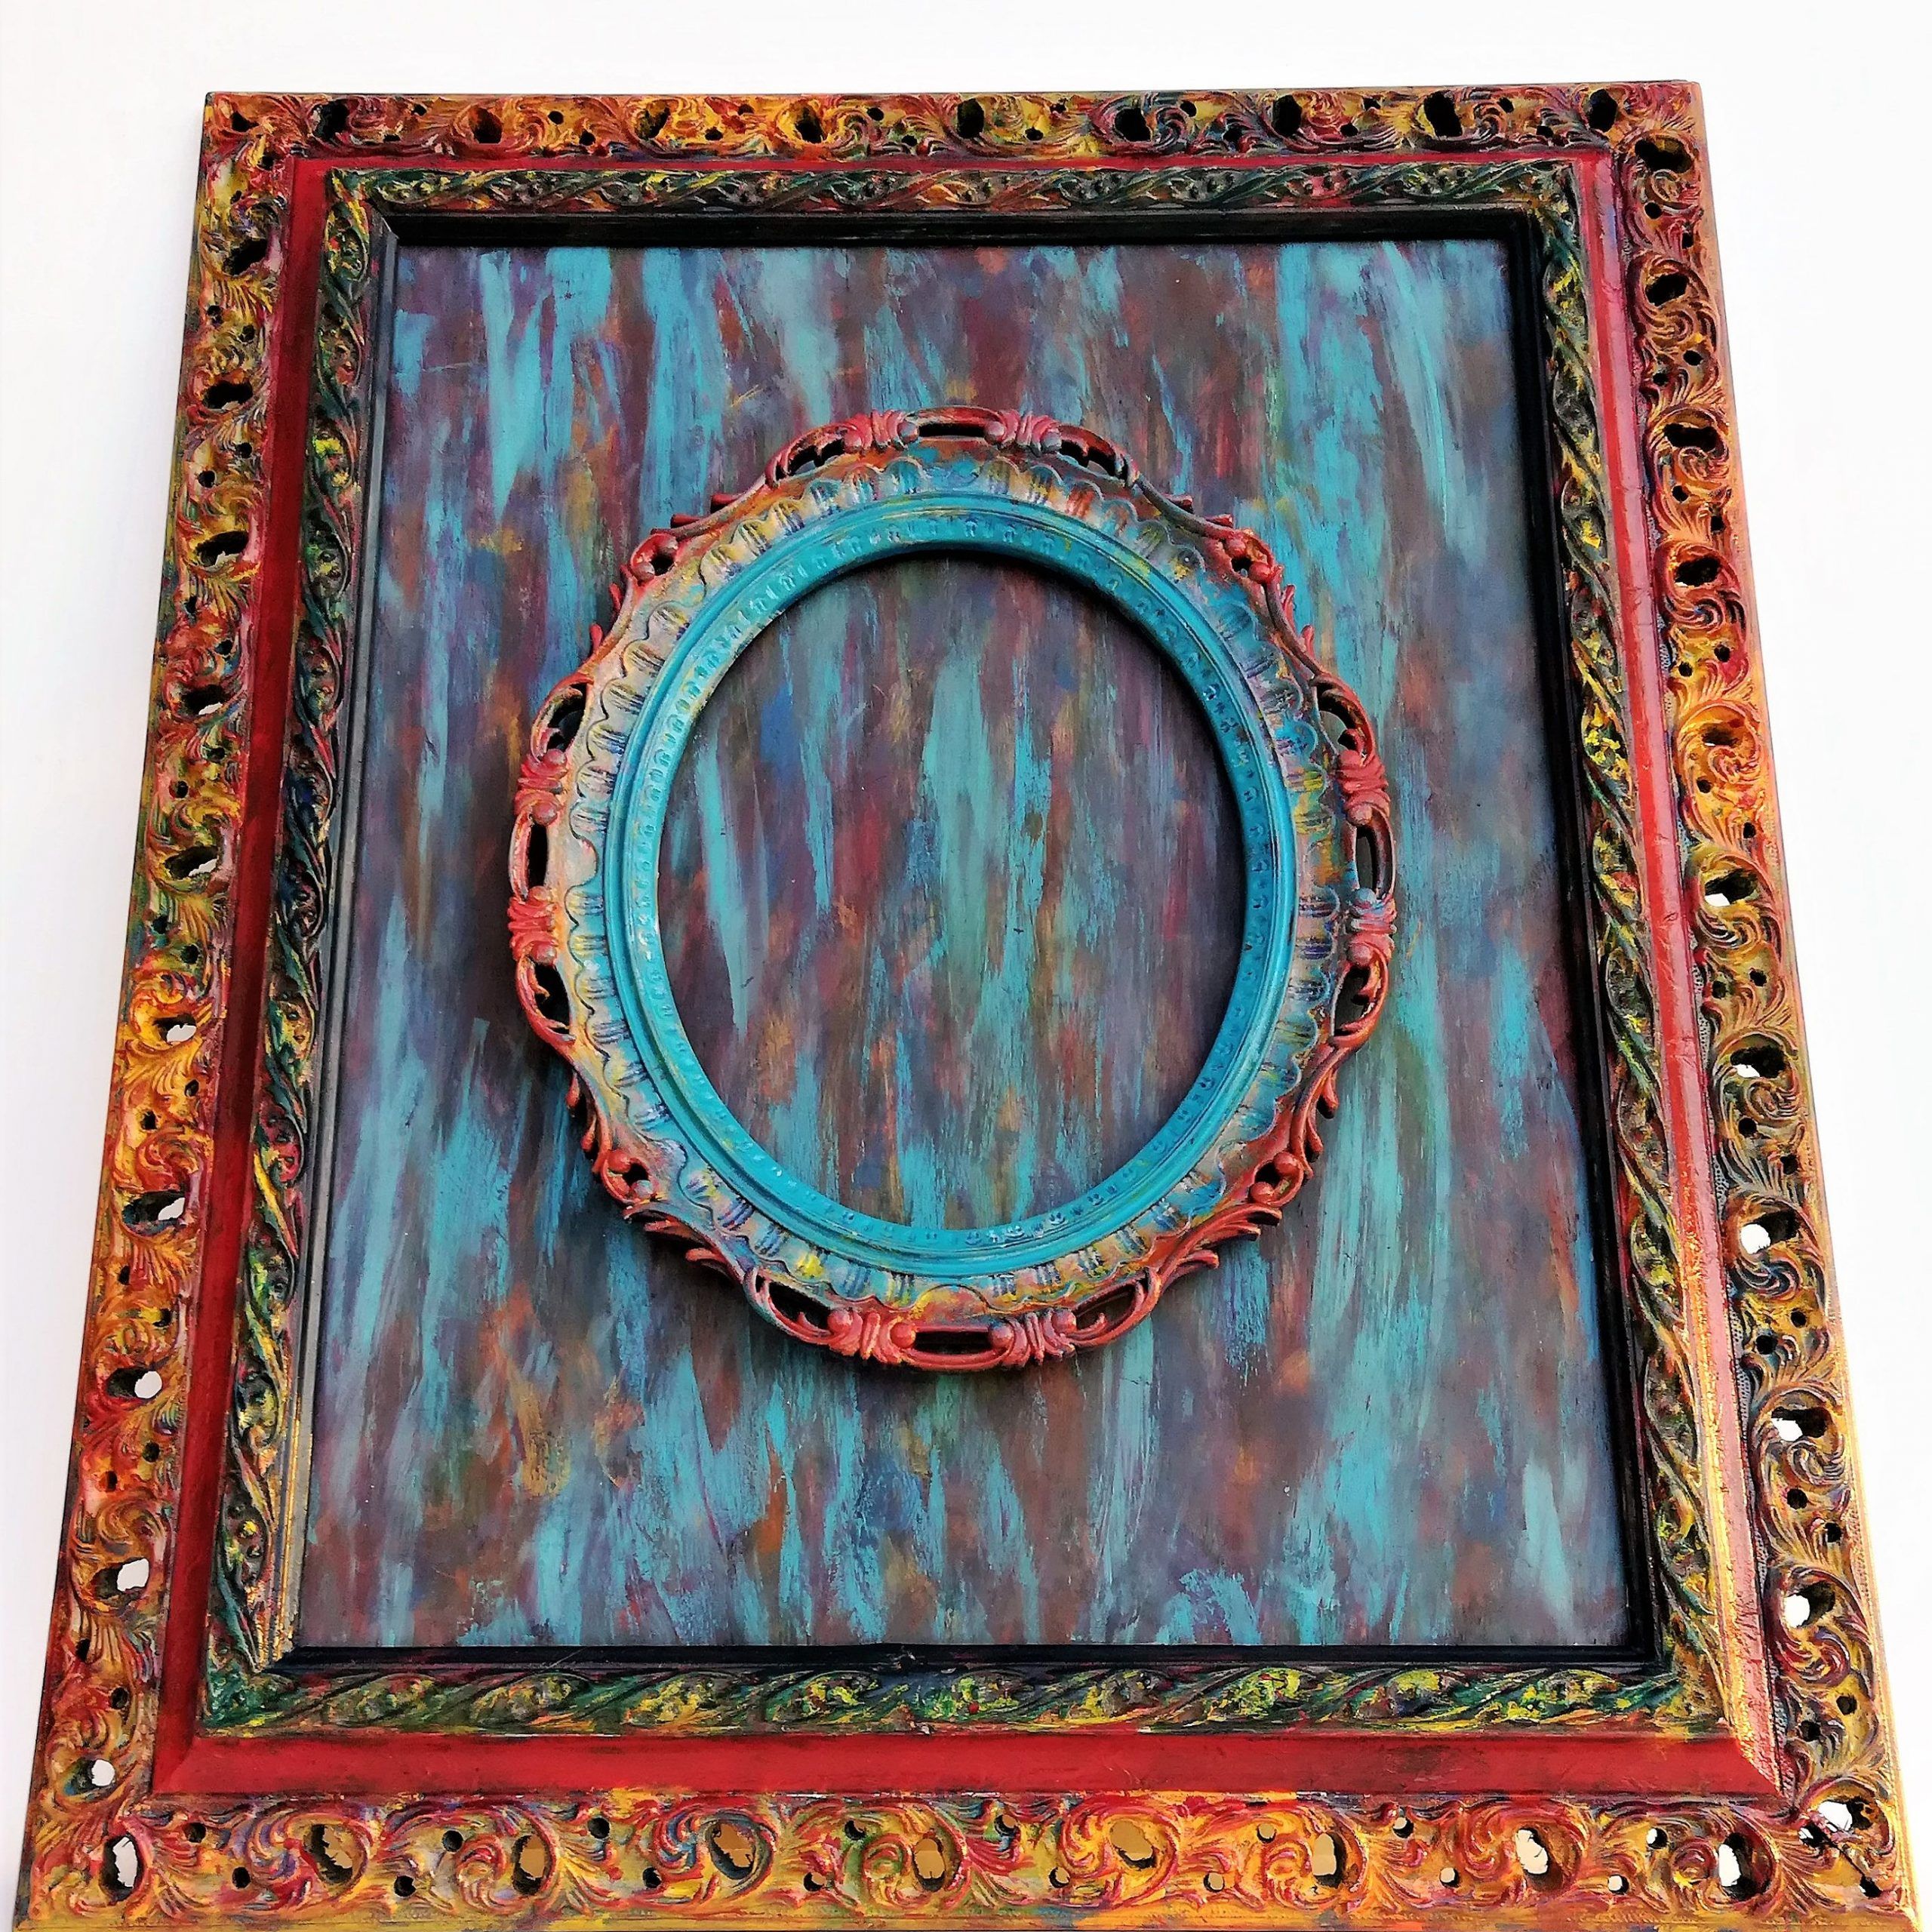 Best And Newest Ornate Style Wall Frame, Wall Hanging, Vintage Decor, Wall For Elegant Wood Wall Art (View 19 of 20)